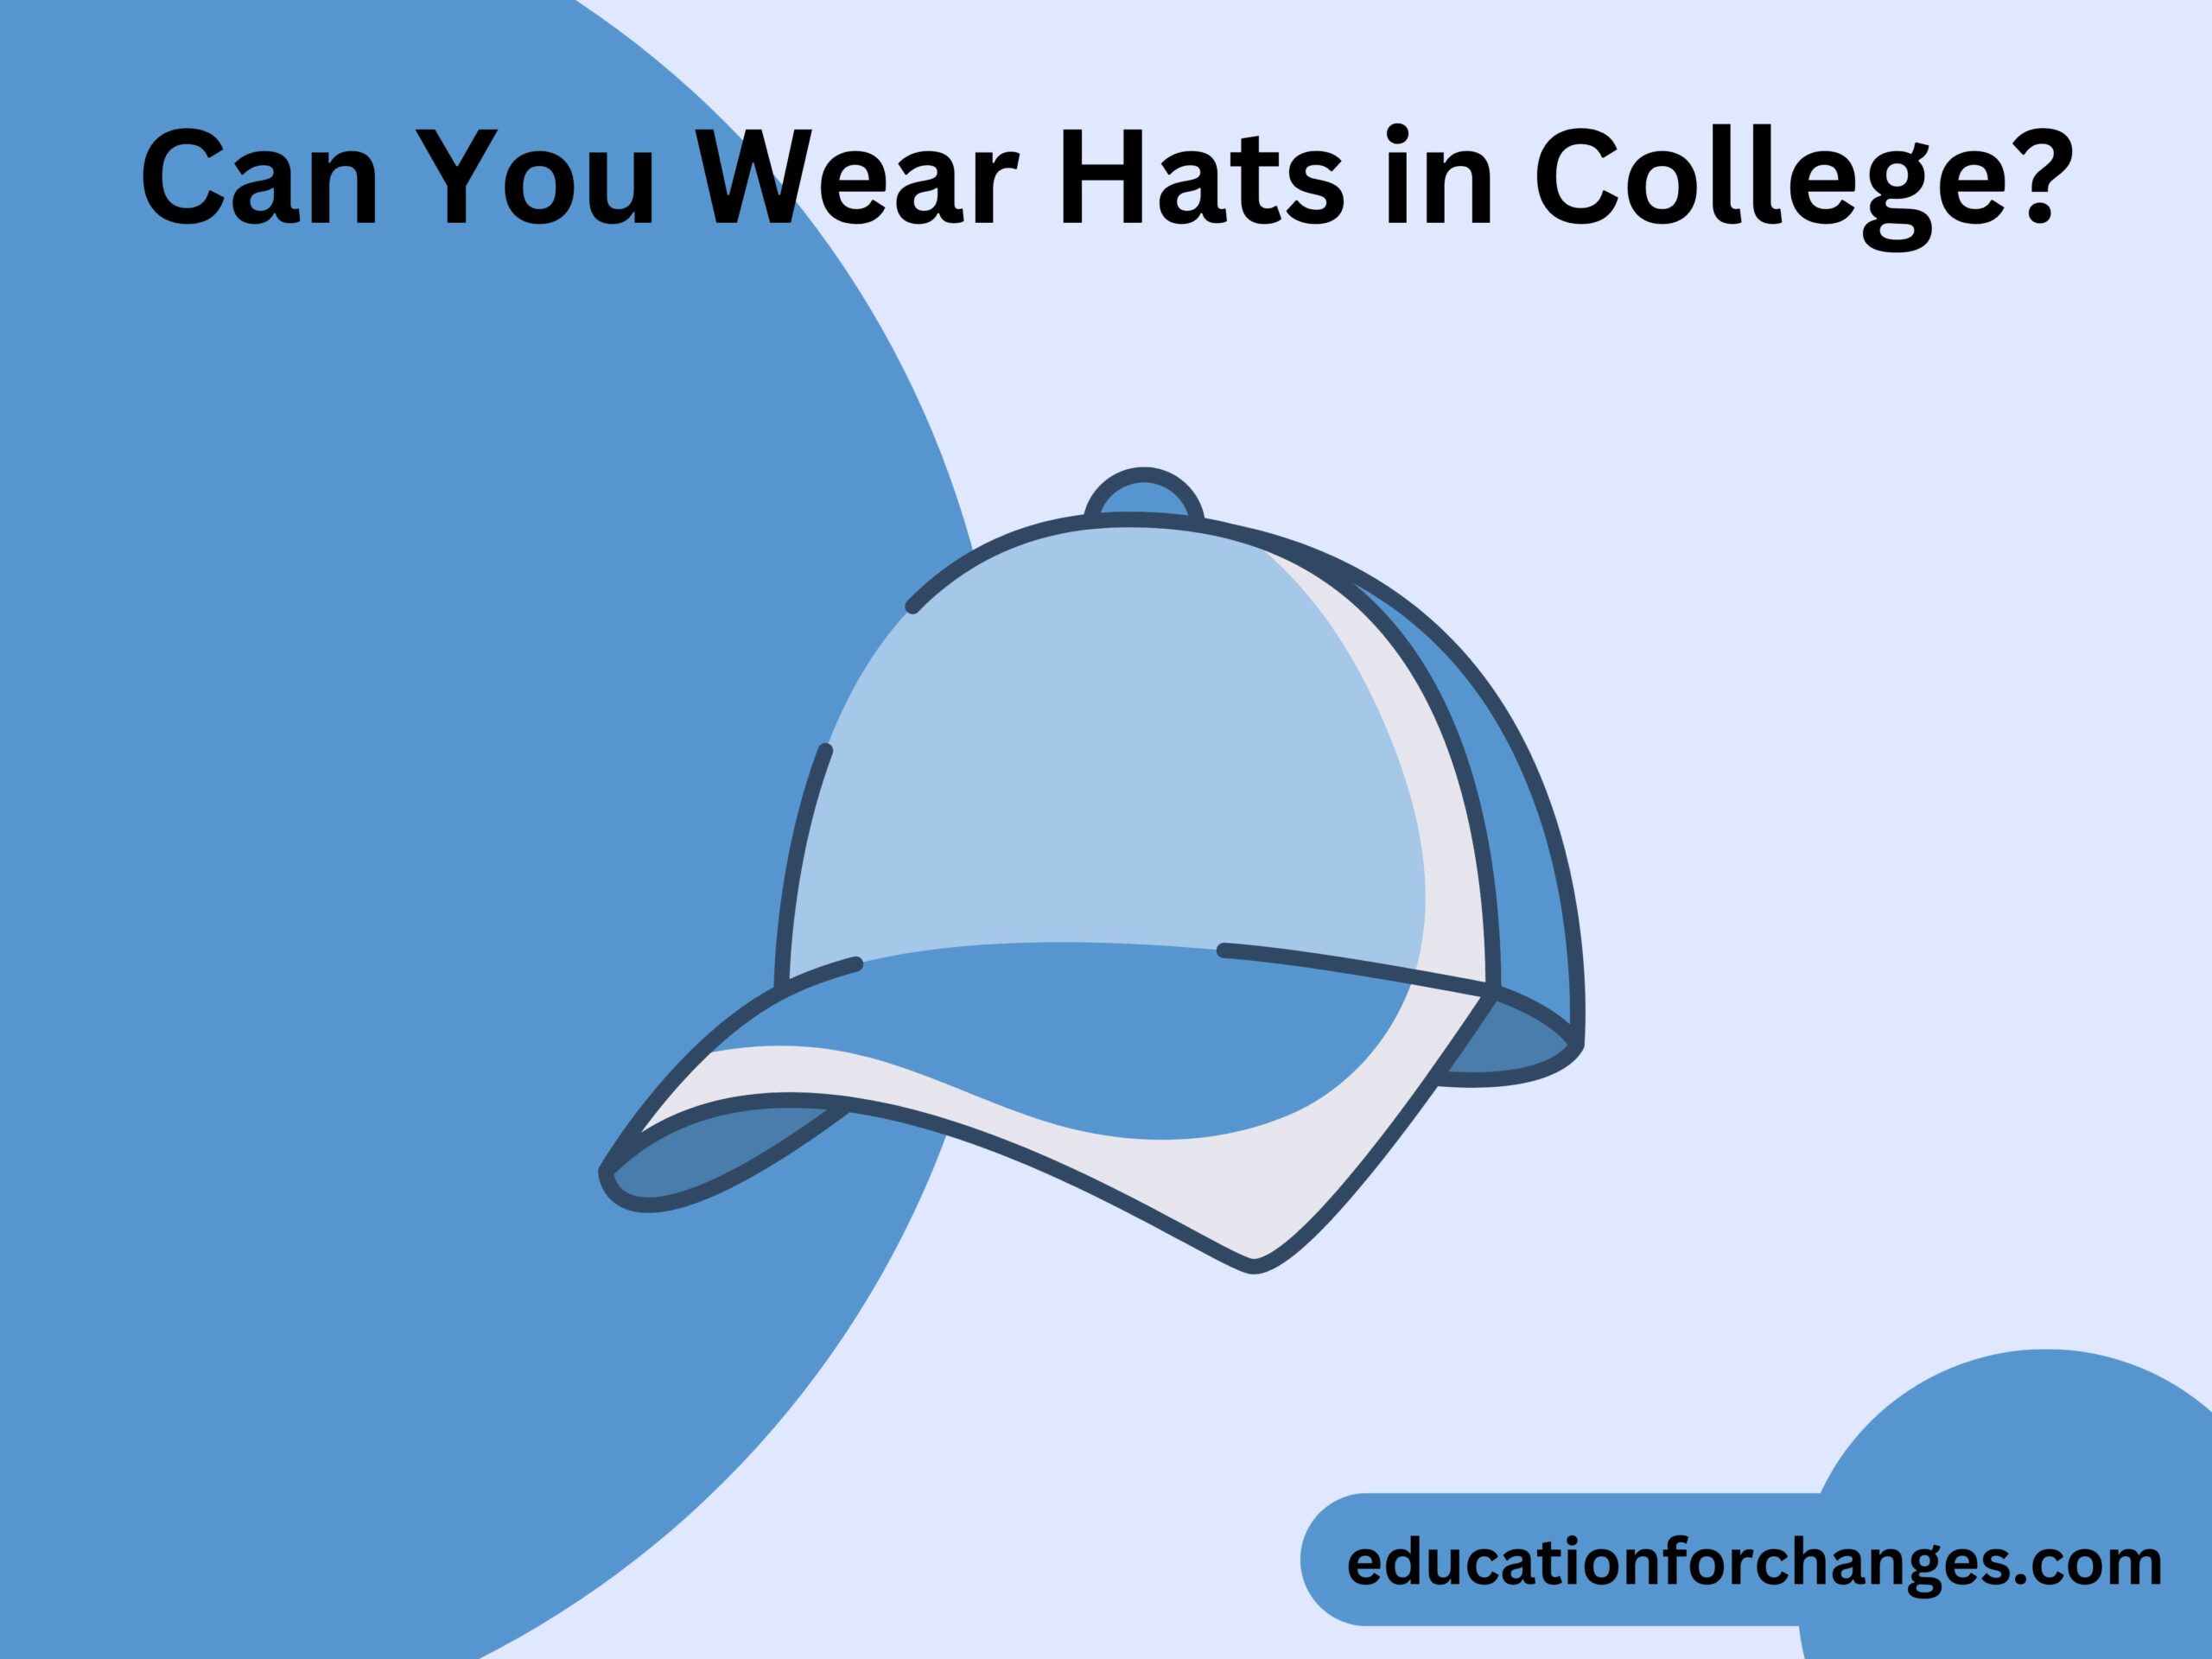 Can You Wear Hats in College